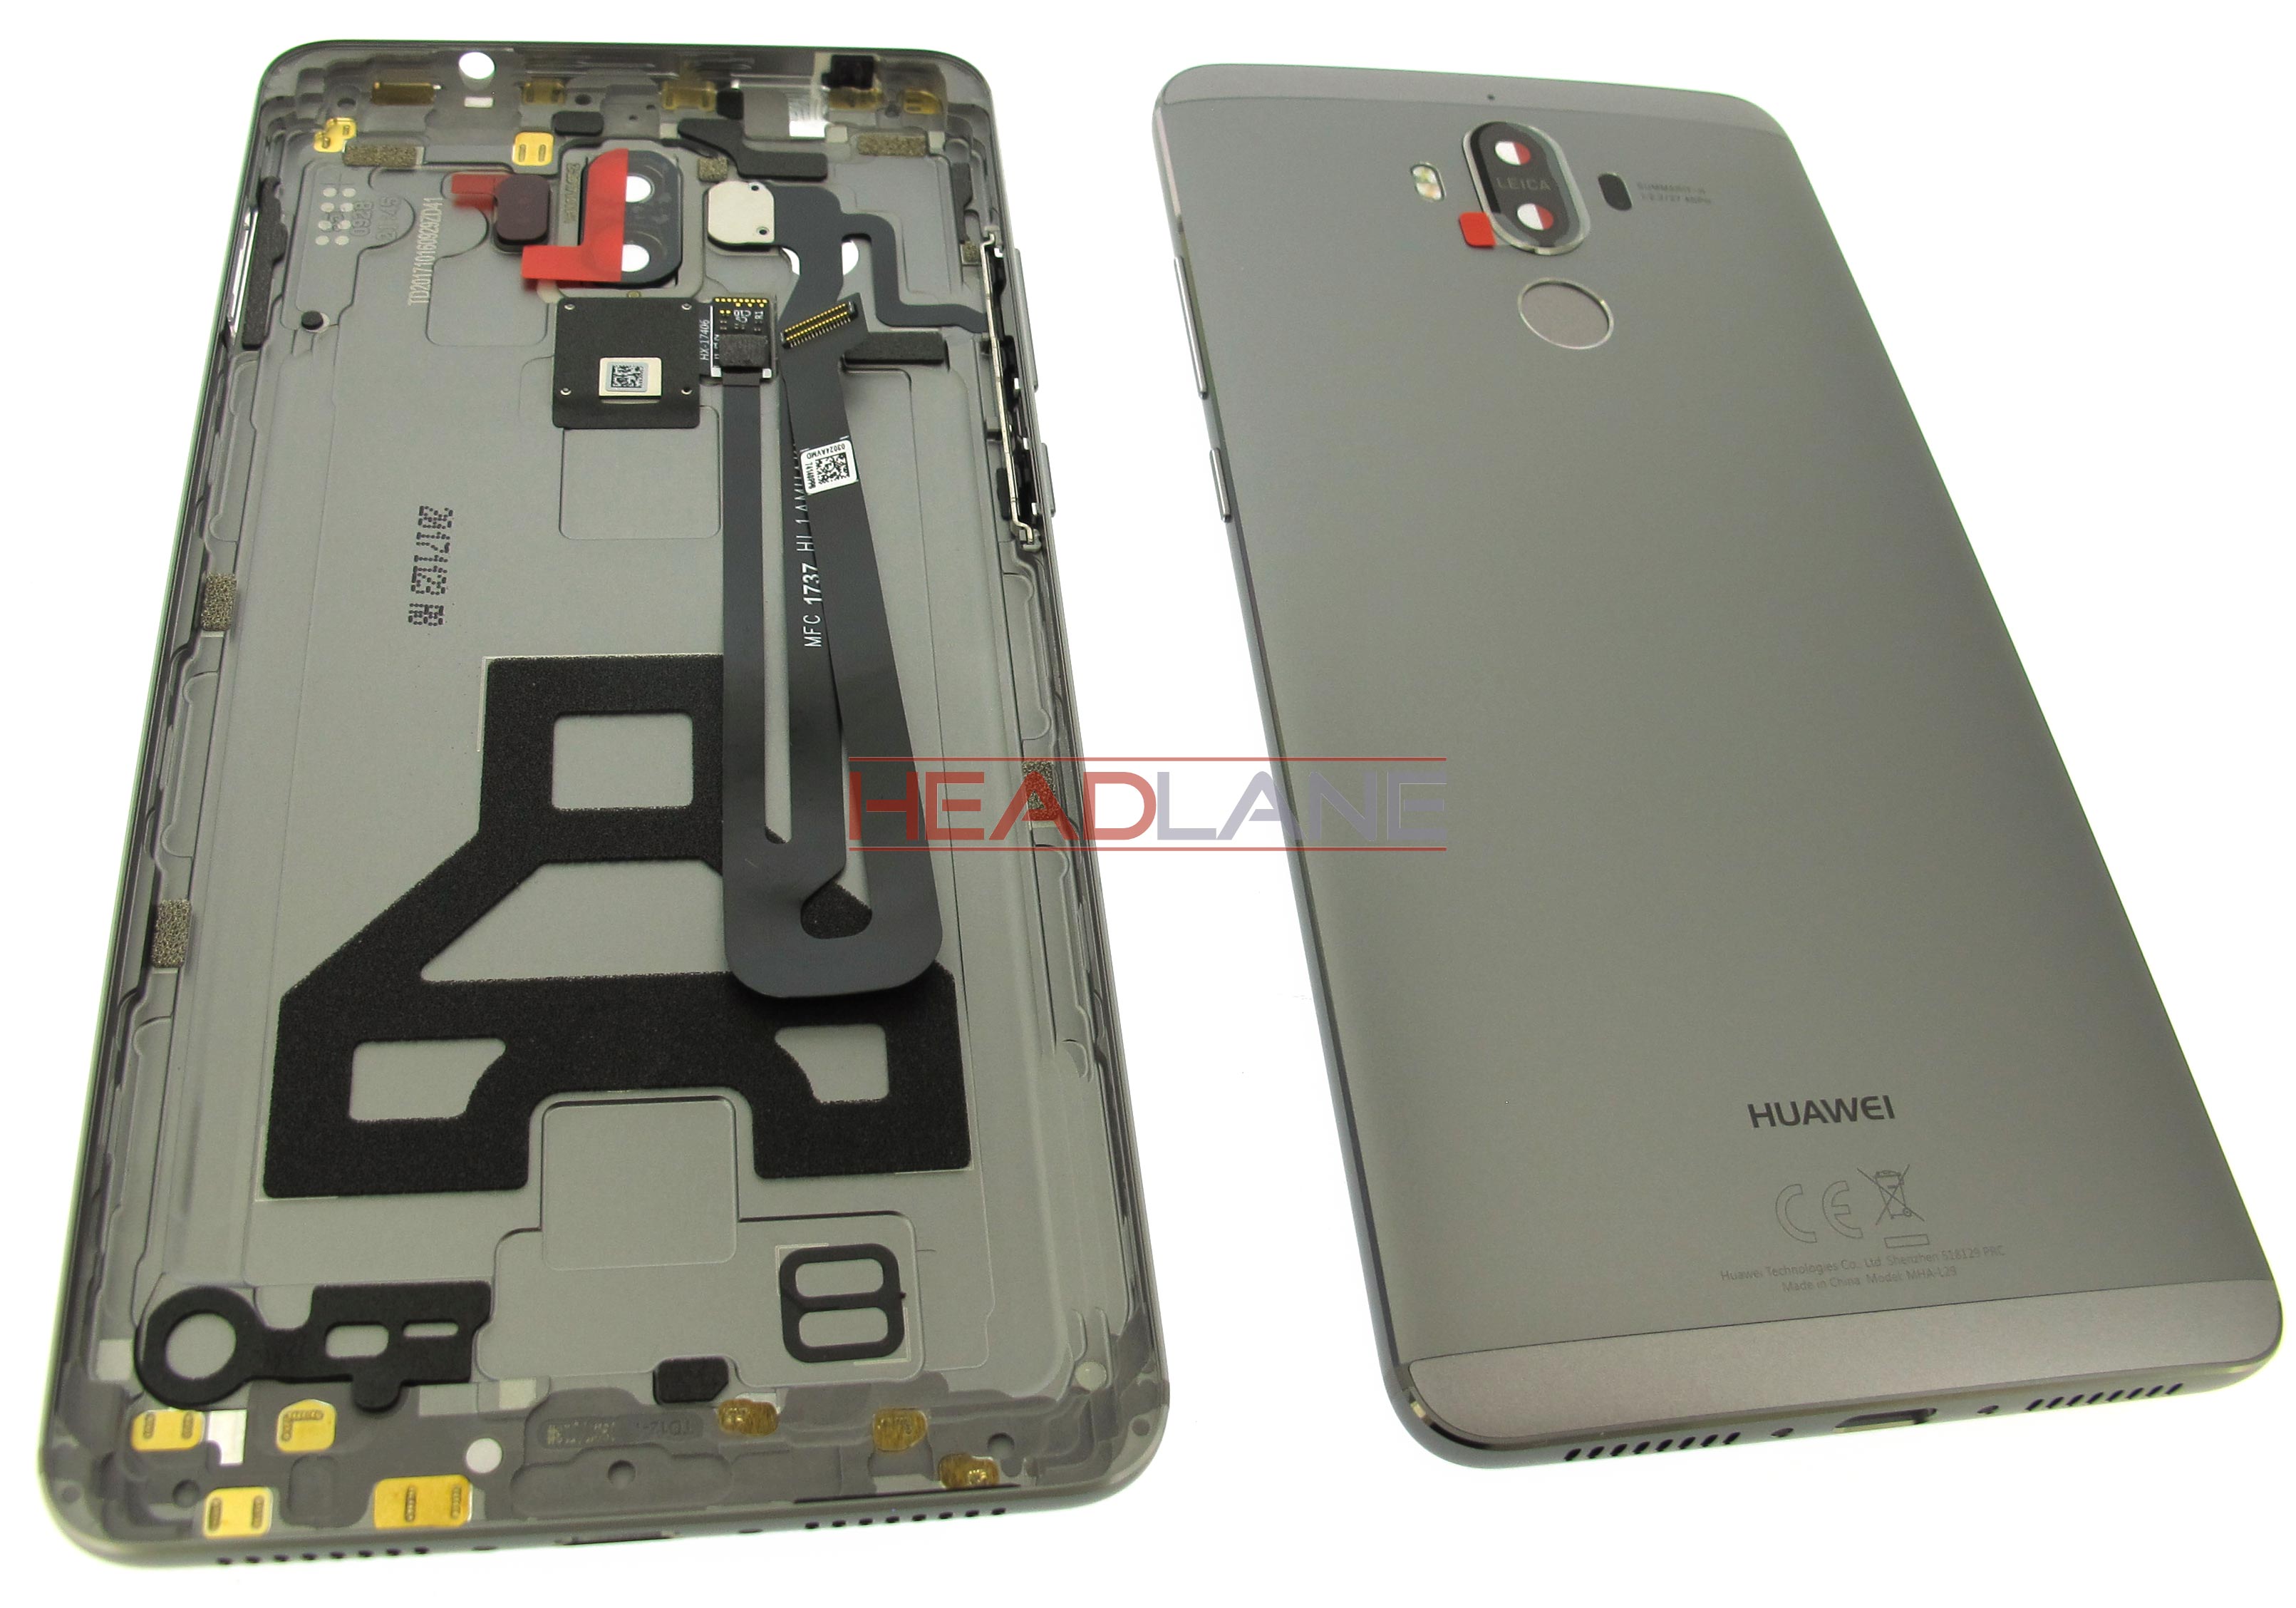 Huawei Mate 9 Battery Cover - Space Grey